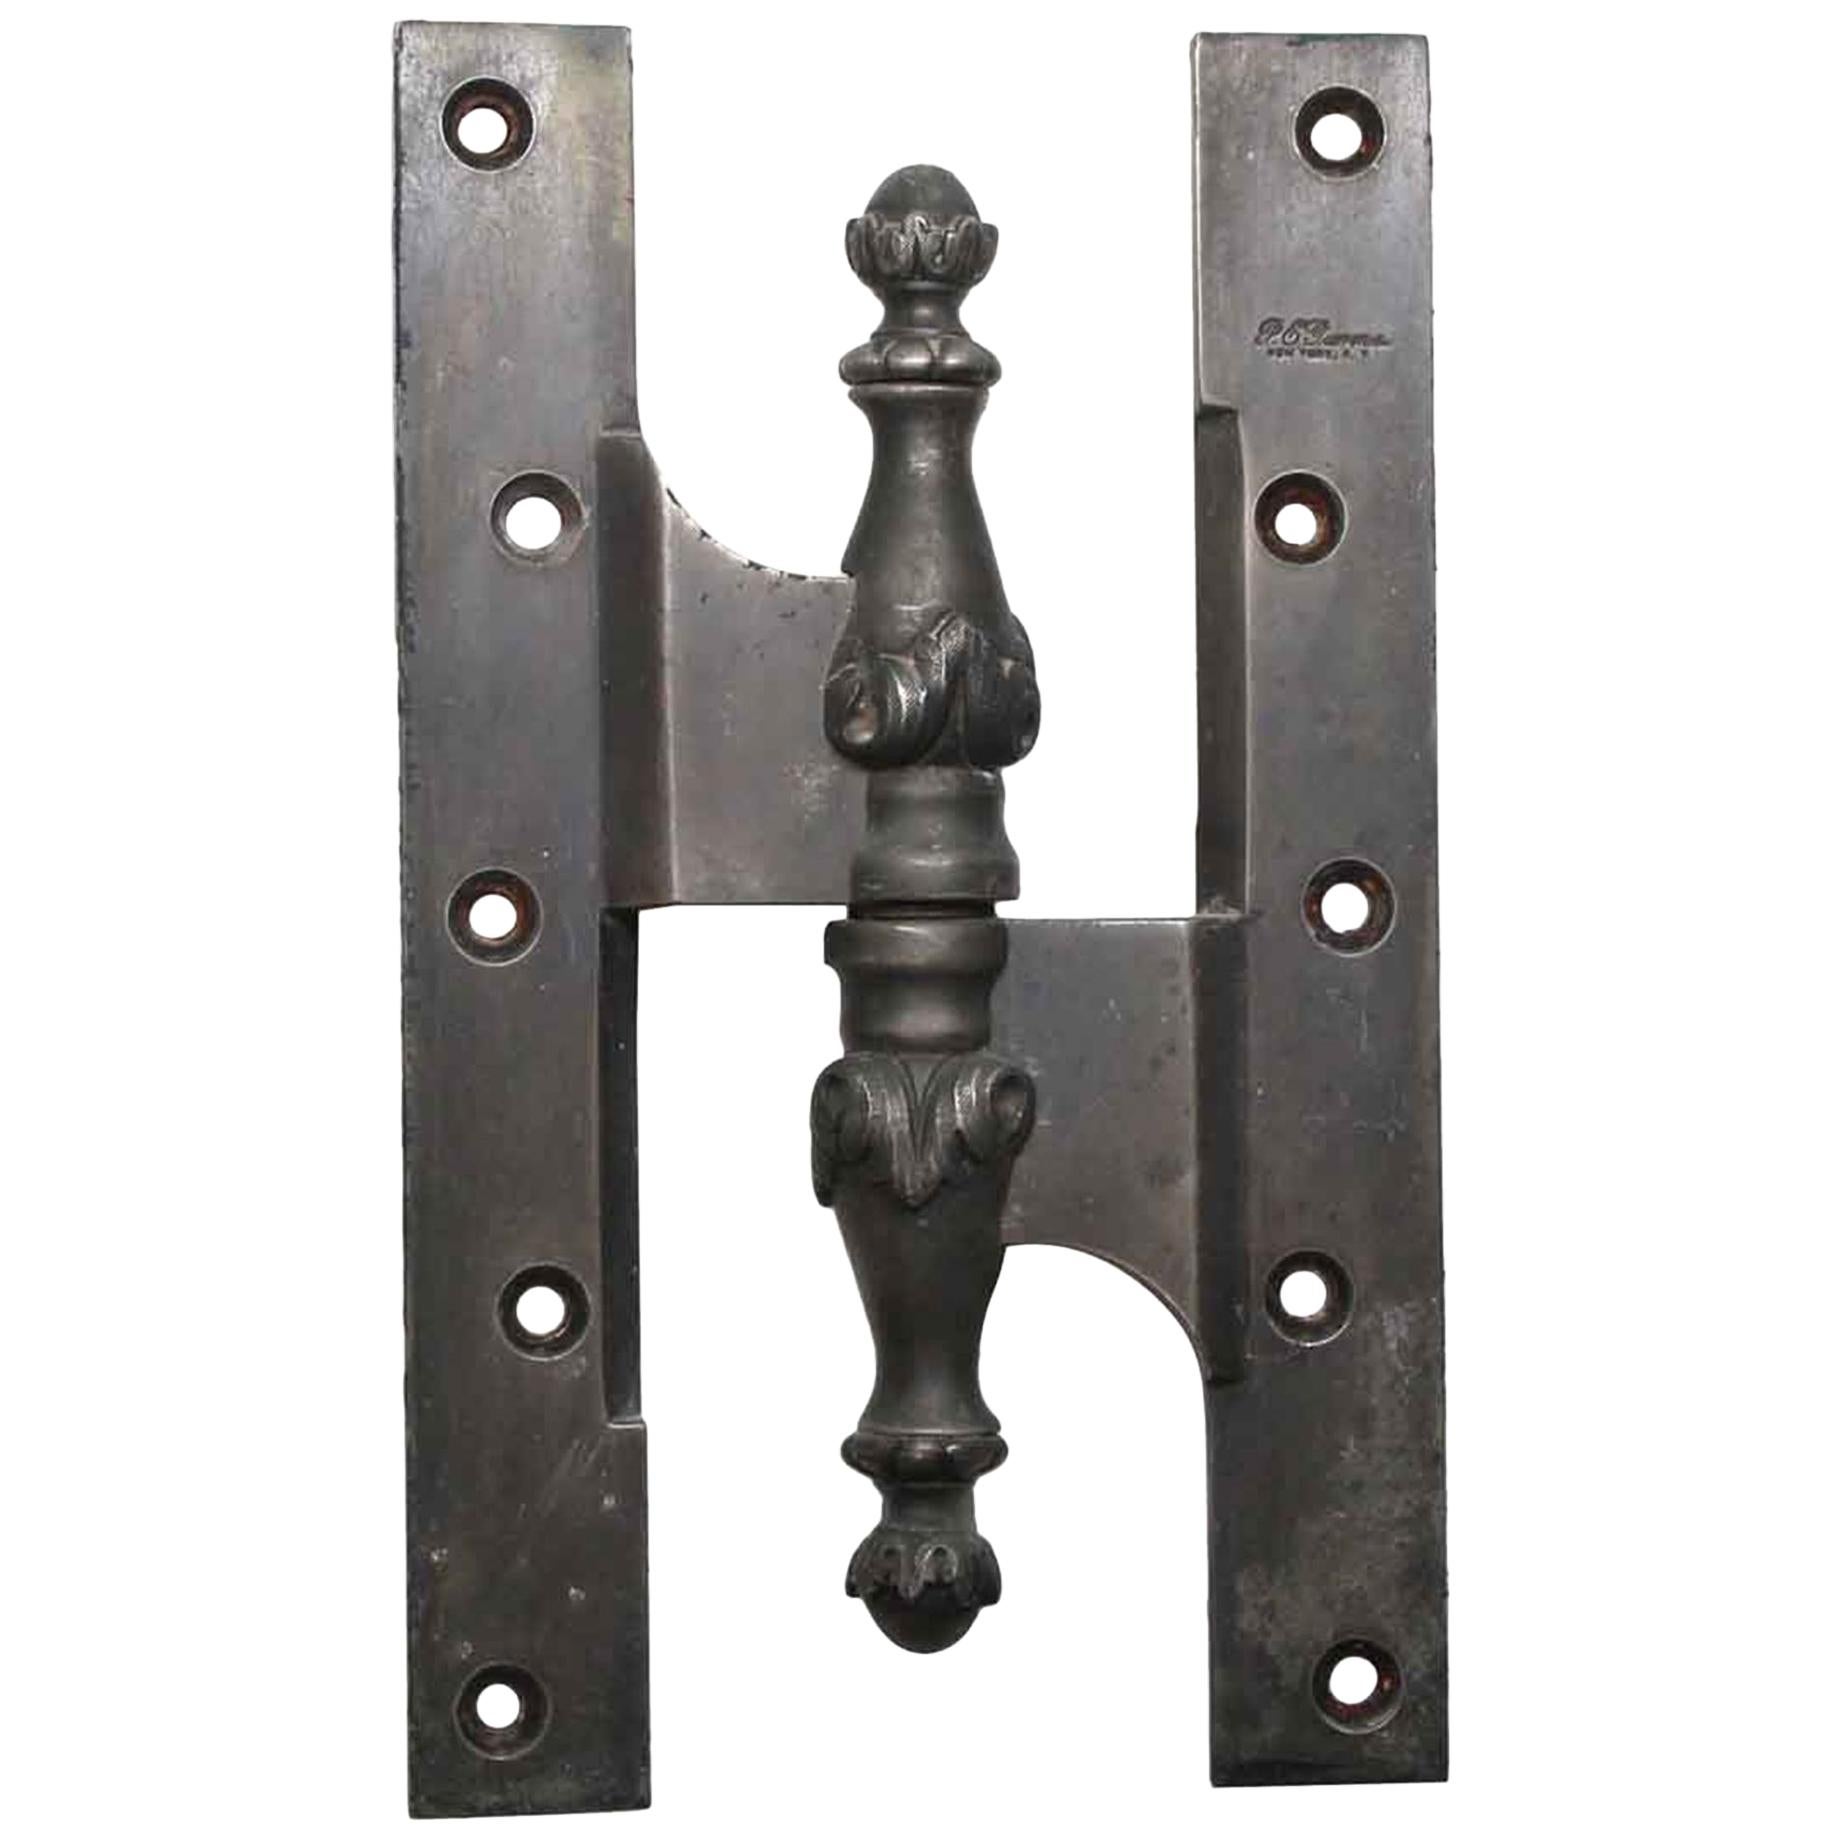 Gothic style P.E. Guerin H shaped paumelle hinge with decorative steeple tips and nickel plating. No. 75042. Priced as a set of four. Please note, this item is located in our Scranton, PA location.